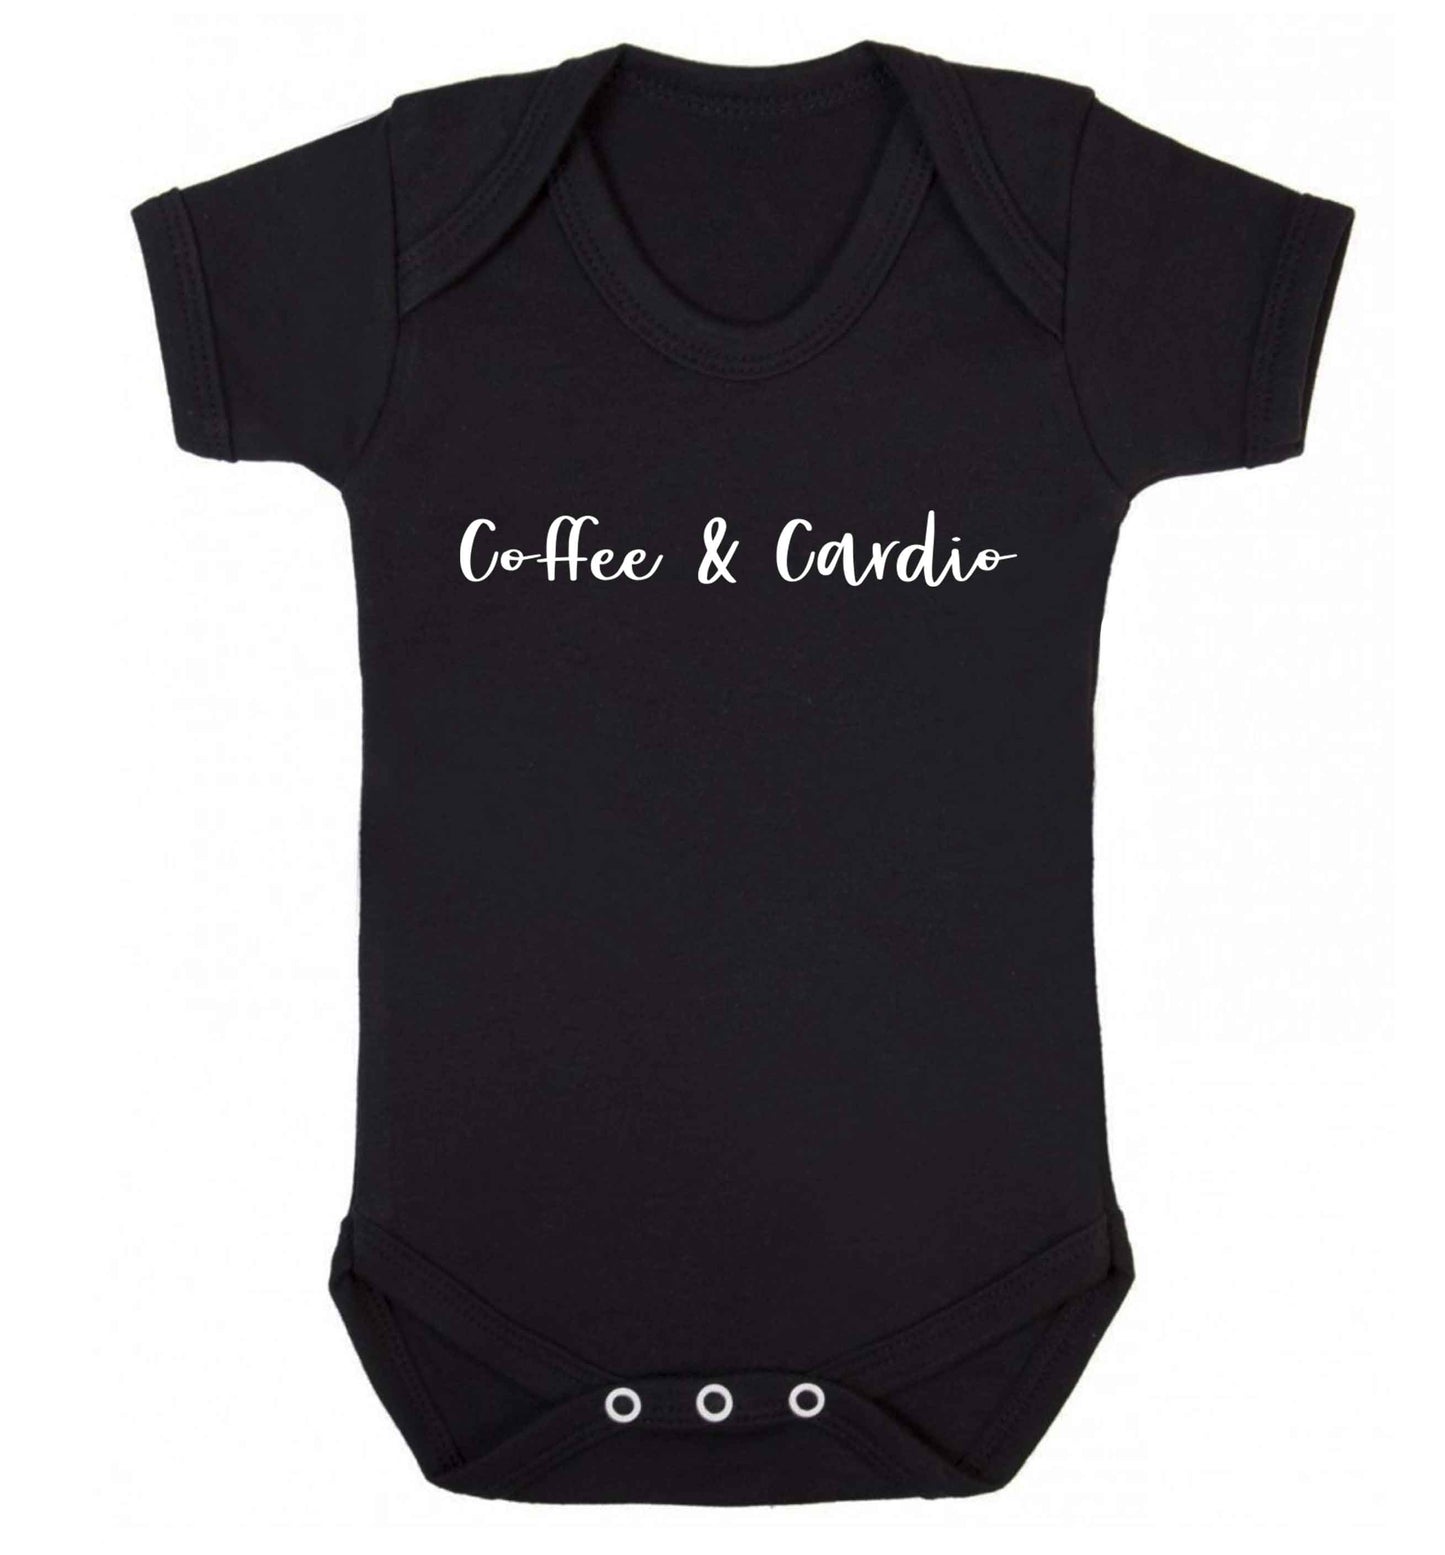 Coffee and cardio Baby Vest black 18-24 months